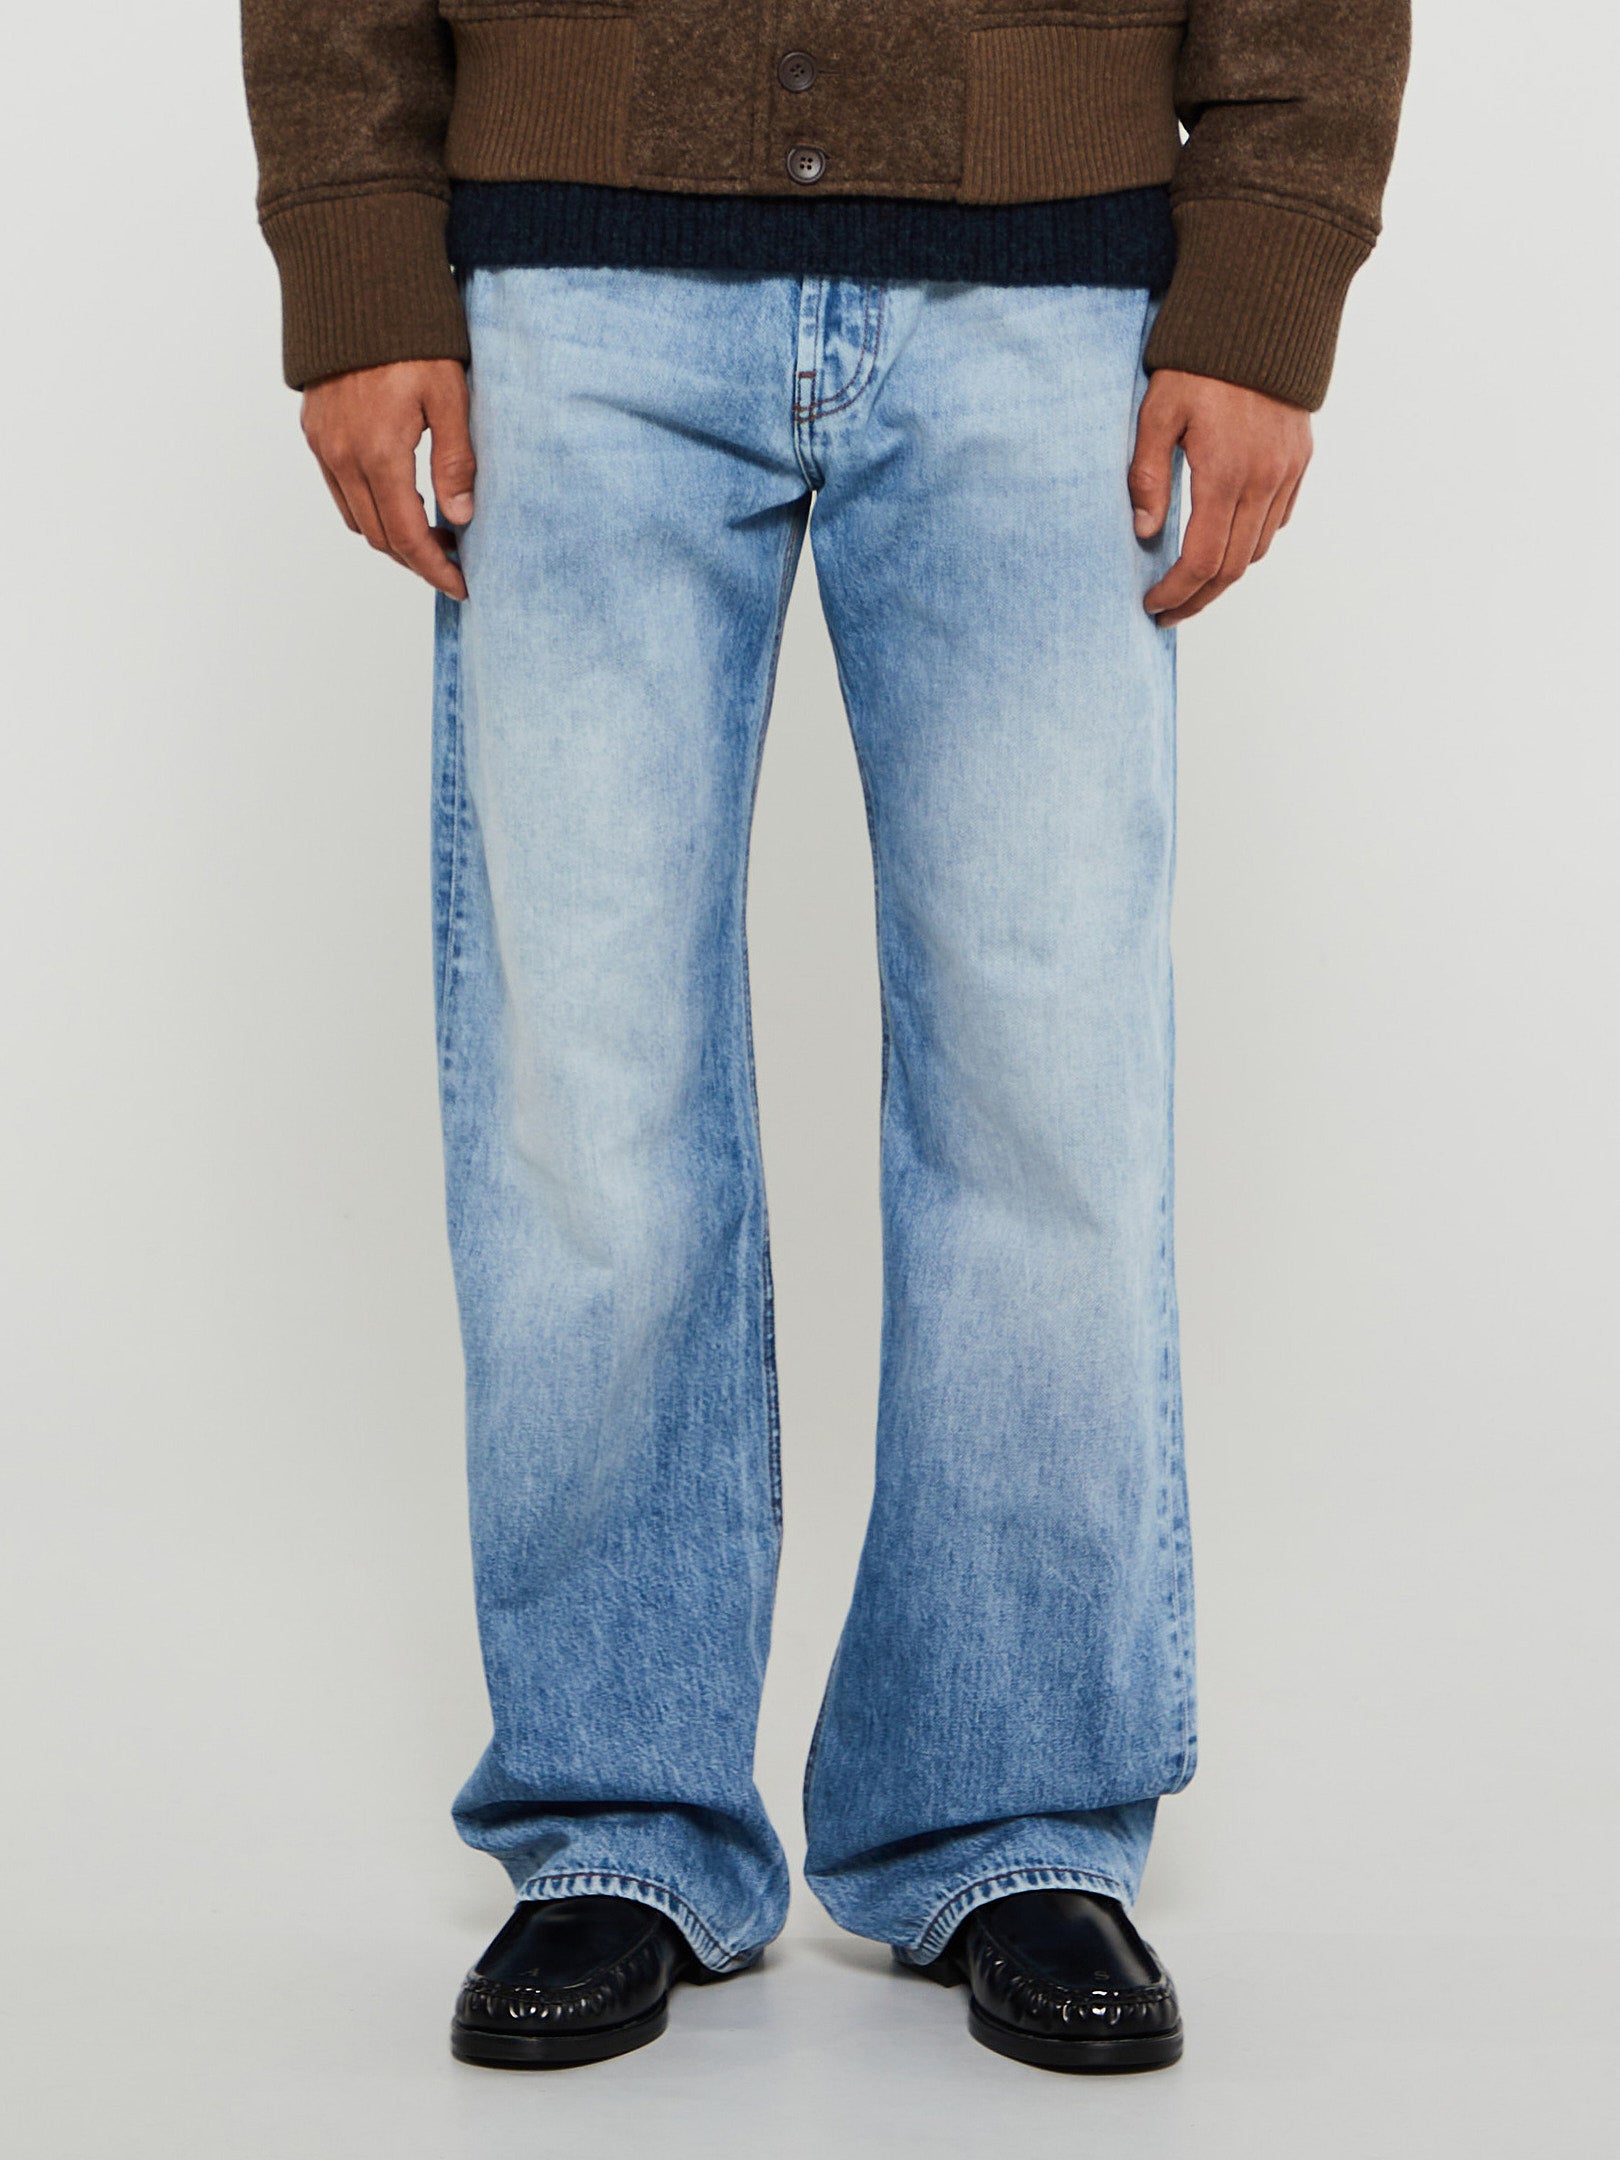 JACQUEMUS - Le De-Nimes Suno Pants in Light Blue and Tabac